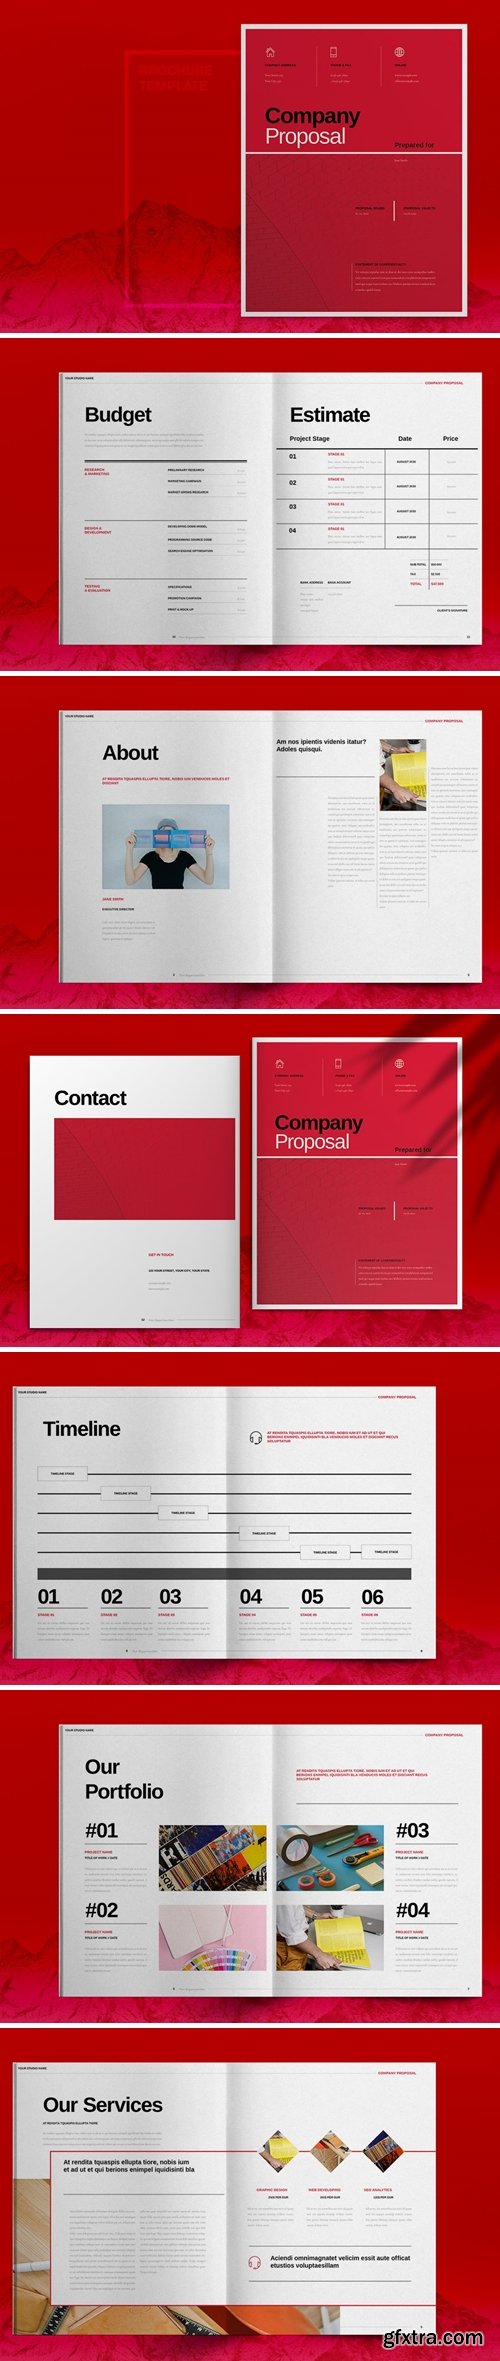 Red Company Proposal